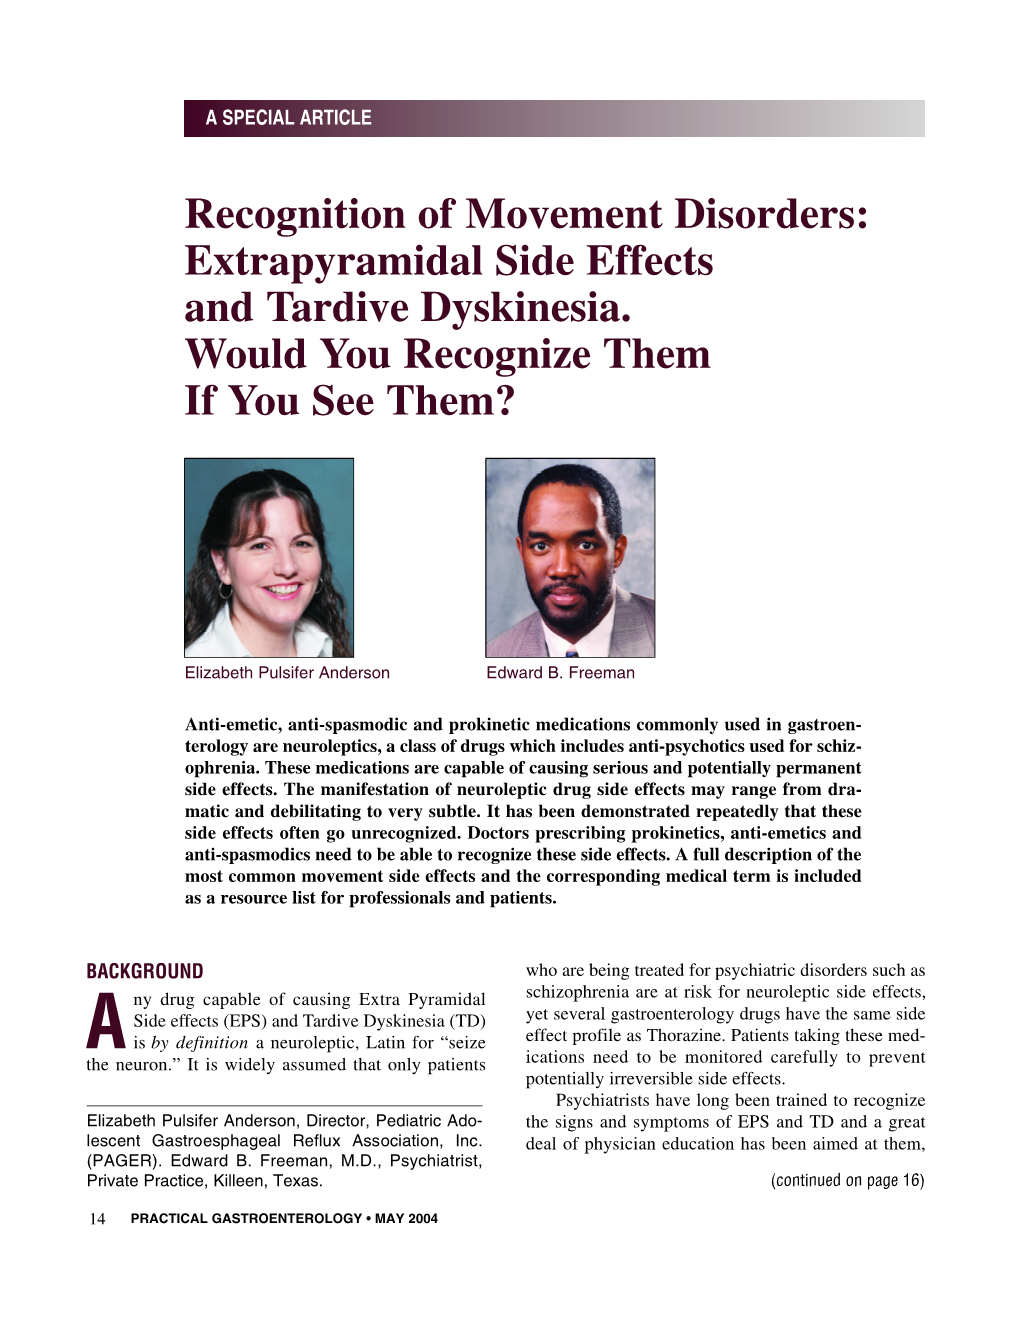 Recognition of Movement Disorders: Extrapyramidal Side Effects and Tardive Dyskinesia